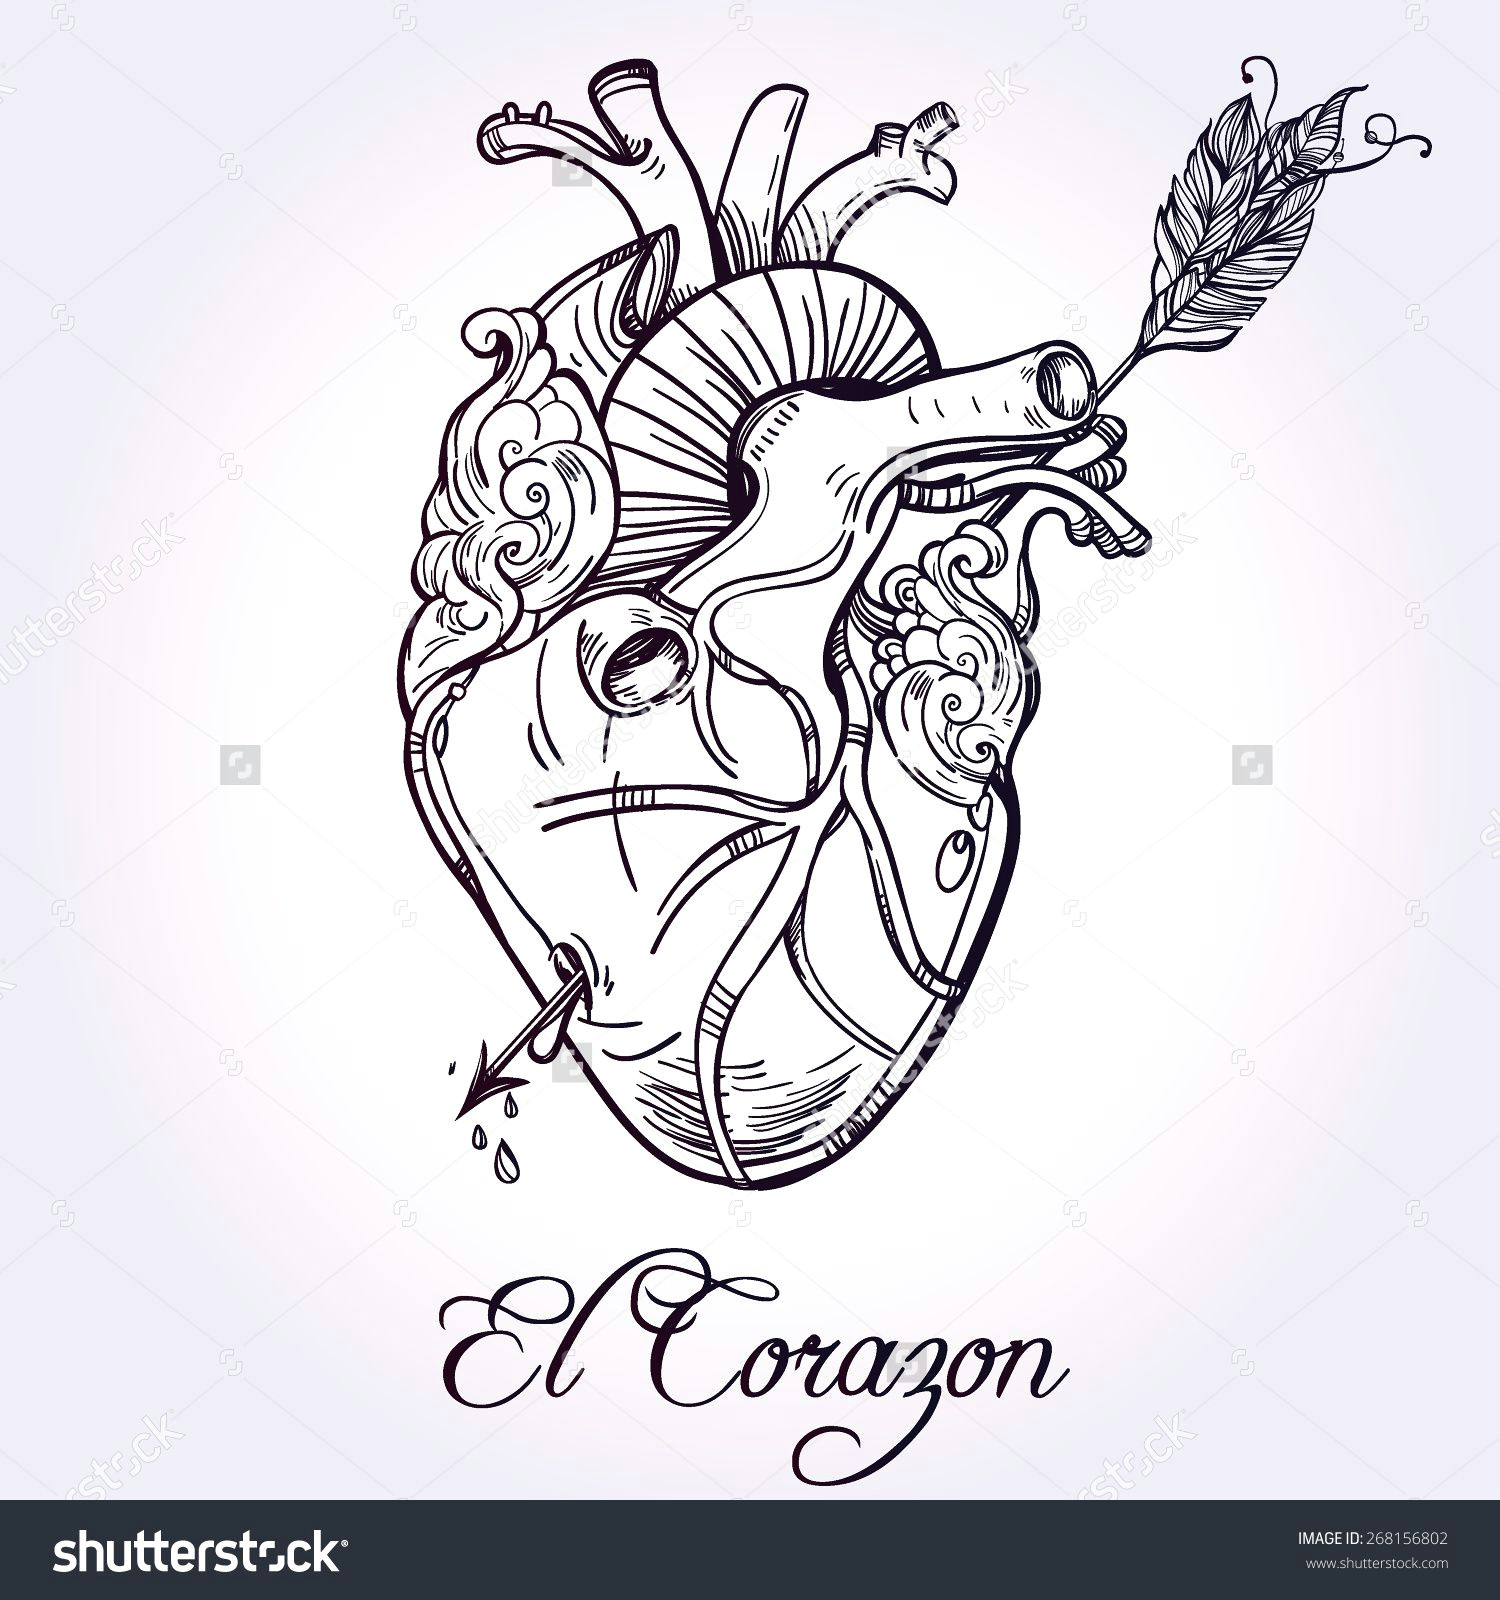 Line Drawing Of A Human Heart Sketched Hand Drawn Line Art Beautiful Human Heart with Arrow El